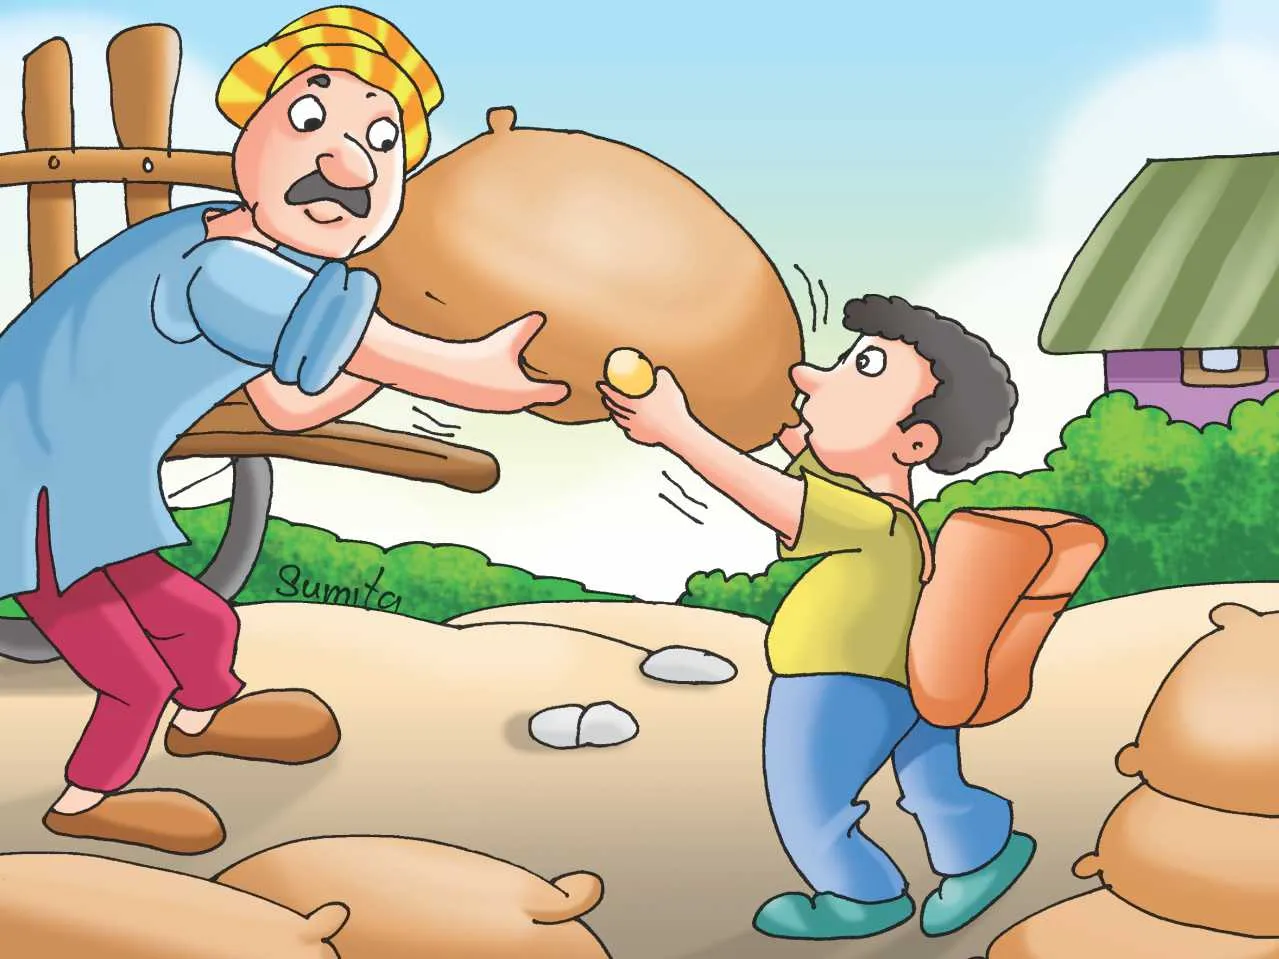 Man and boy working cartoon images